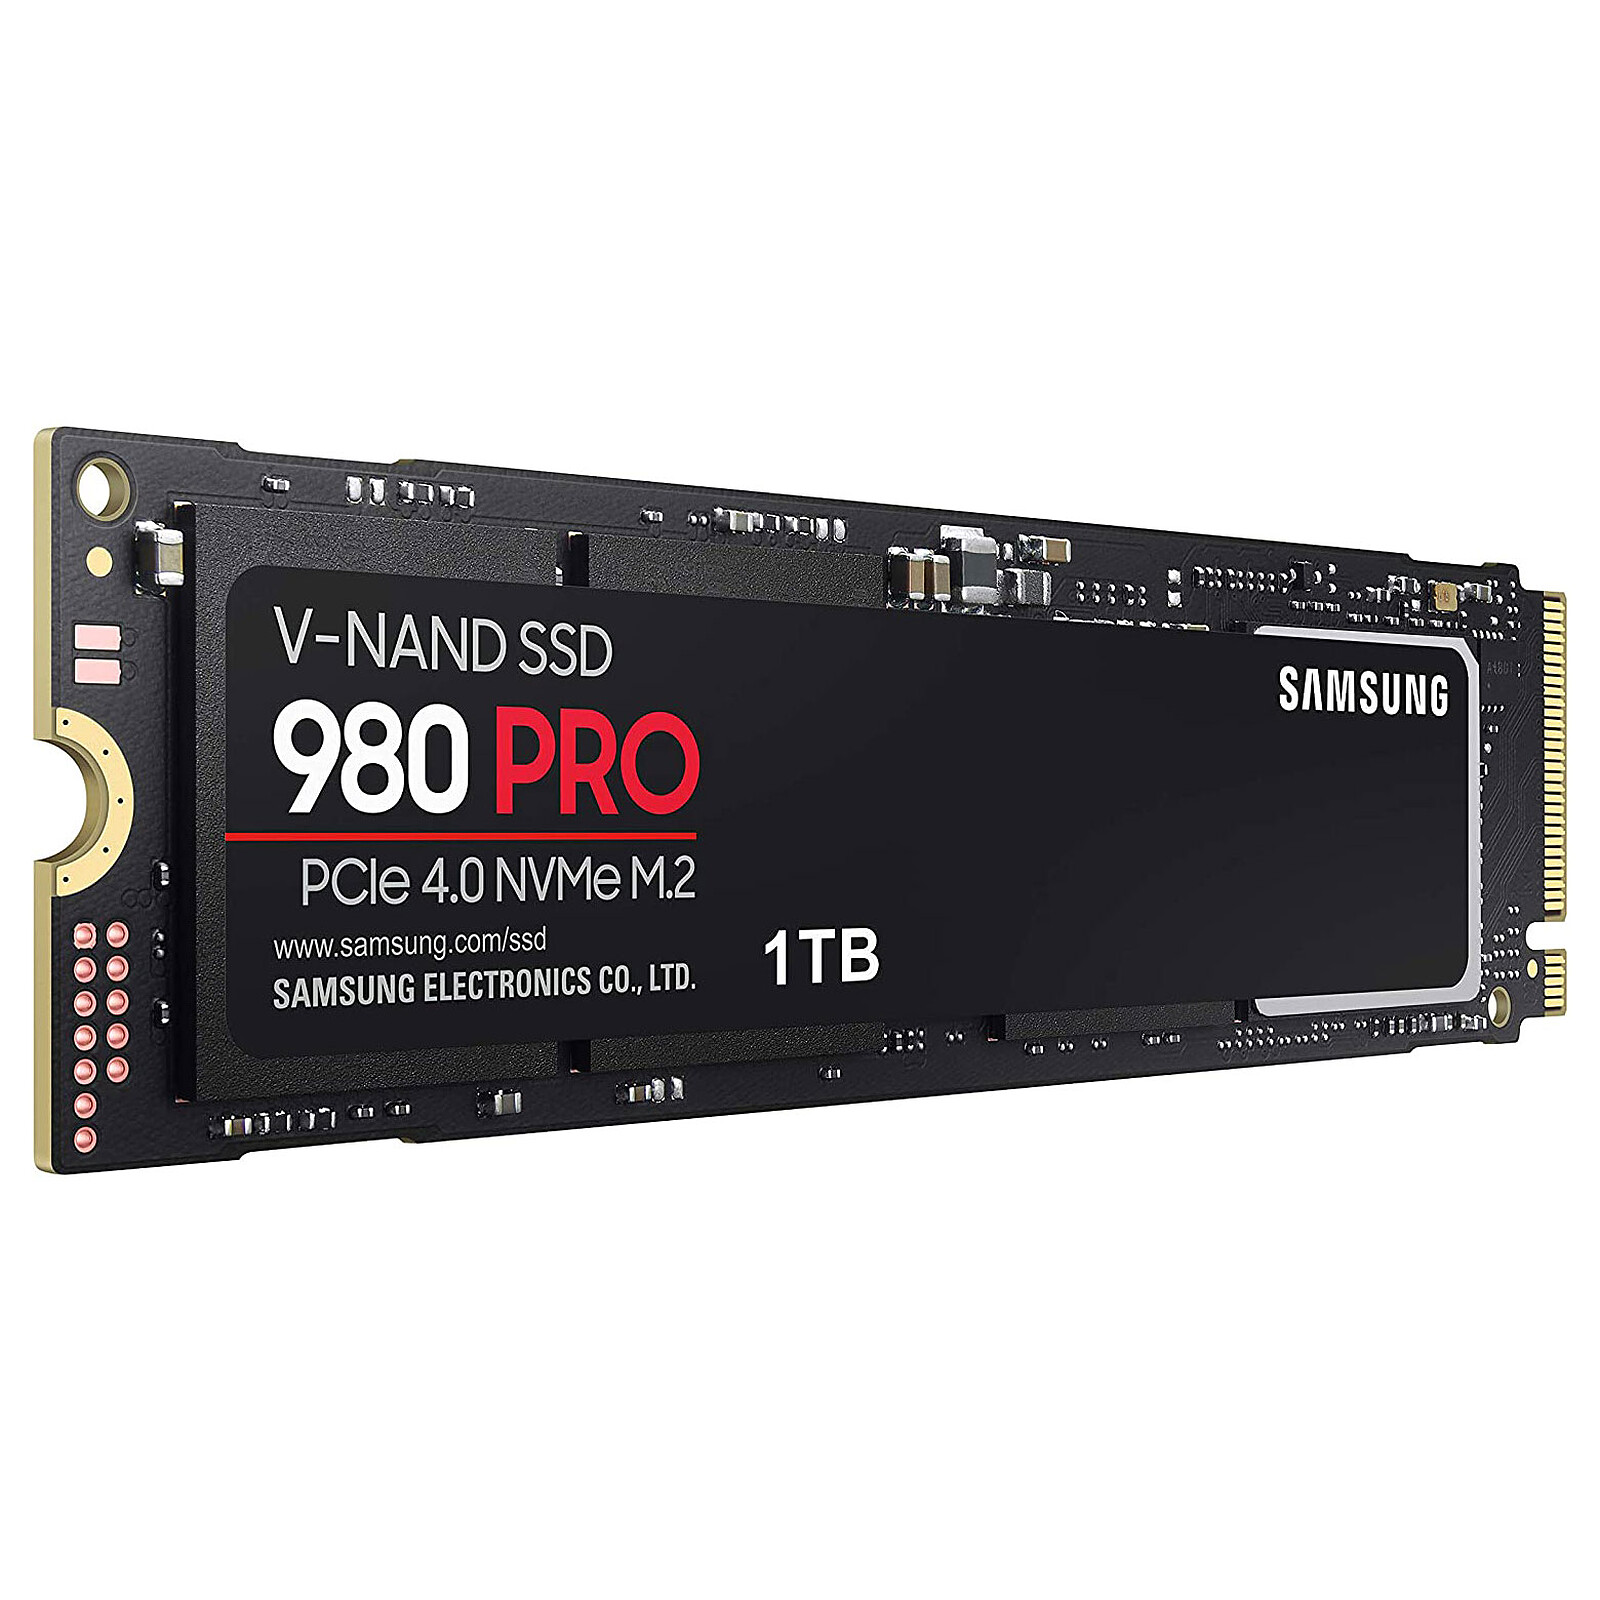 Samsung SSD 870 EVO Disque Dur Interne SSD 2,5 SATA III 250Go 500Go 1To 2To  4To